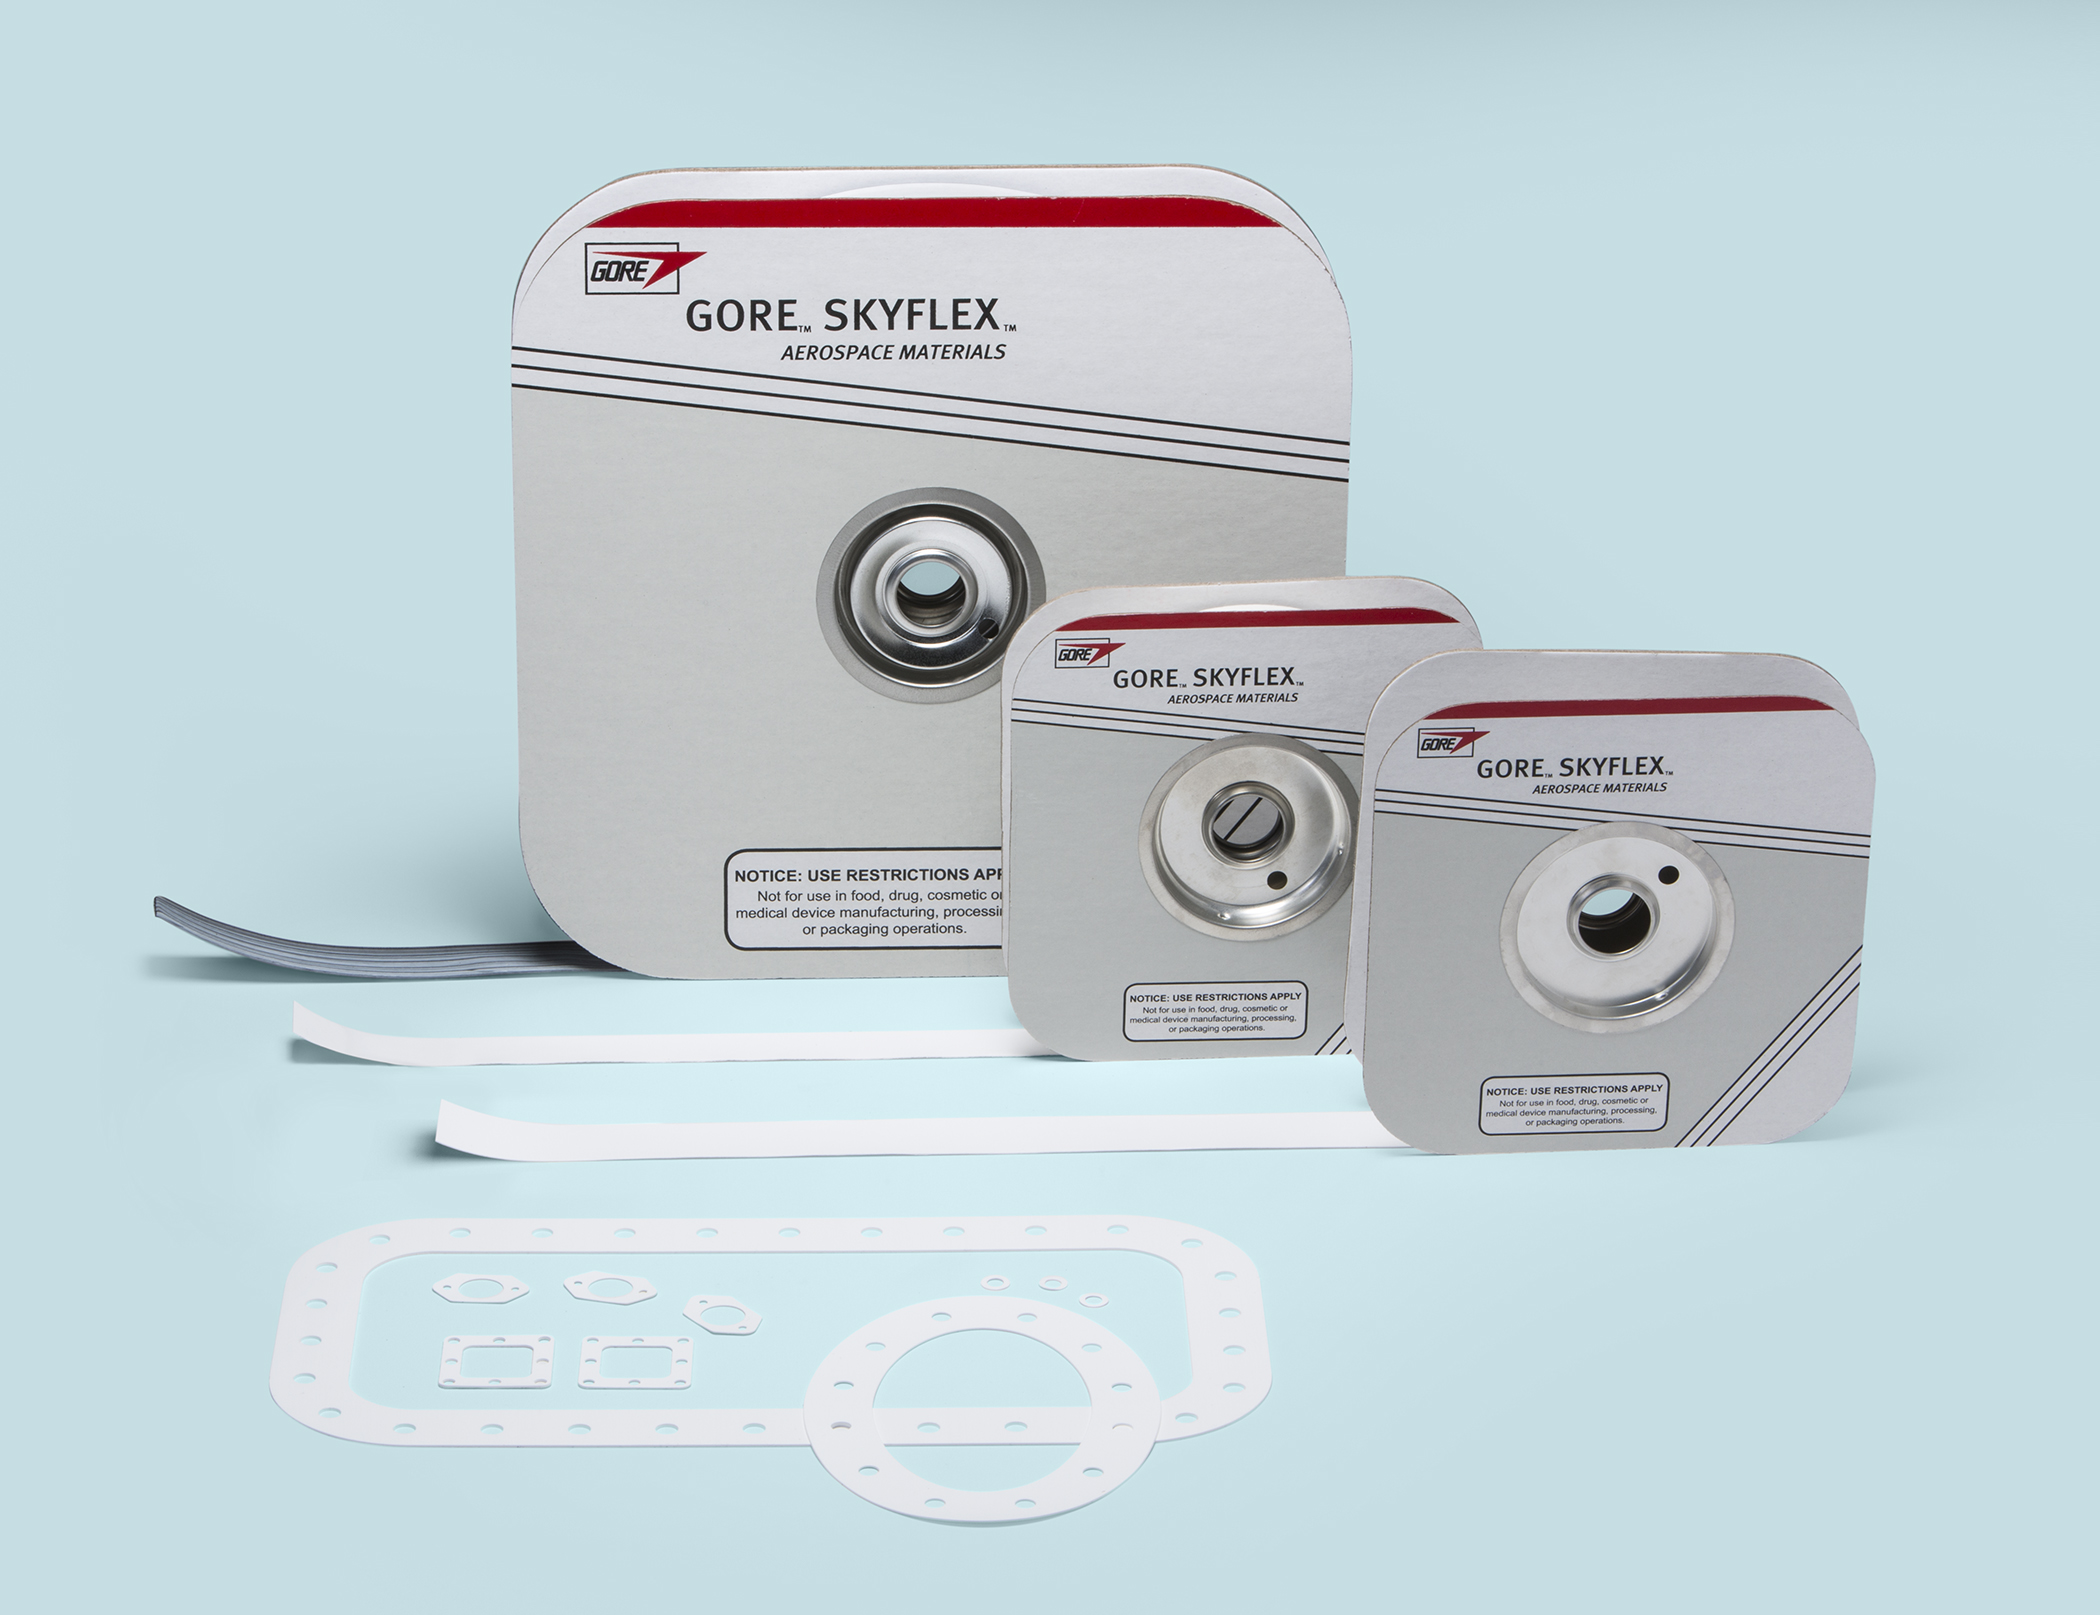 GORE™ SKFYLEX™ Aerospace Materials are lightweight, no-cure tapes and gaskets that solve many aircraft sealing and surface protection challenges.